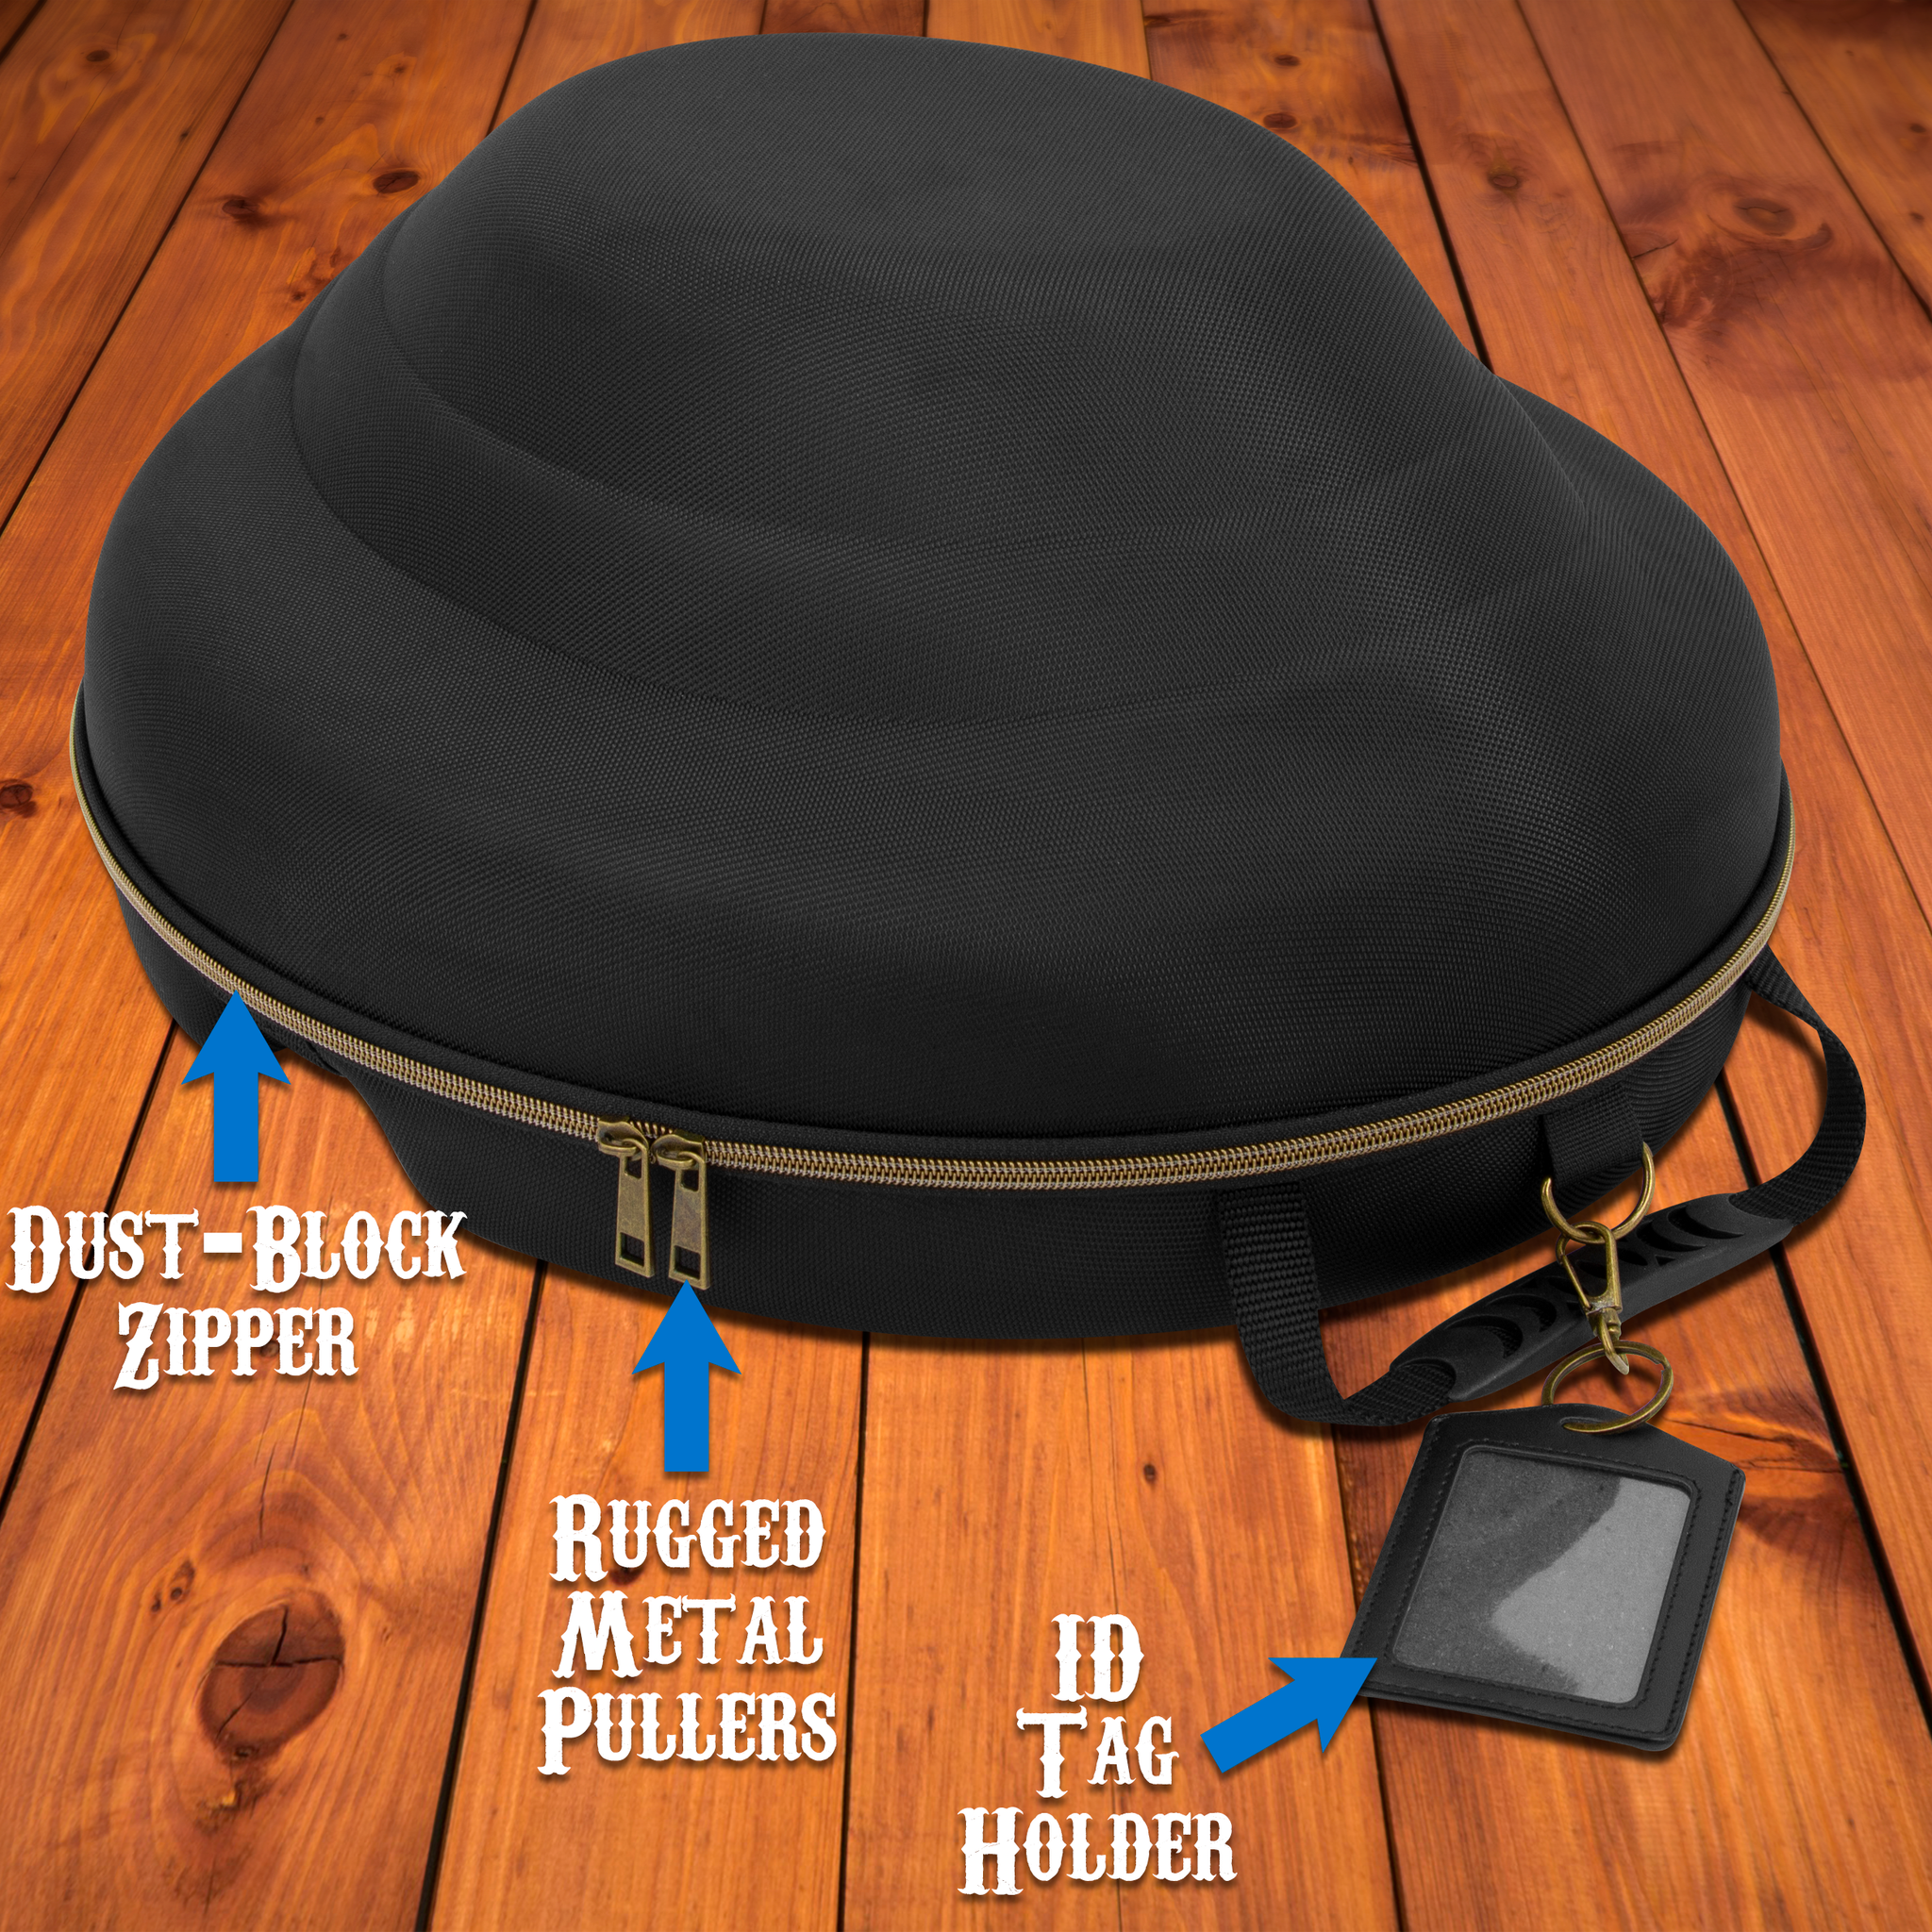 CASEMATIX Hat Case for Fedora, Panama, Bowler Hats and More - Hard